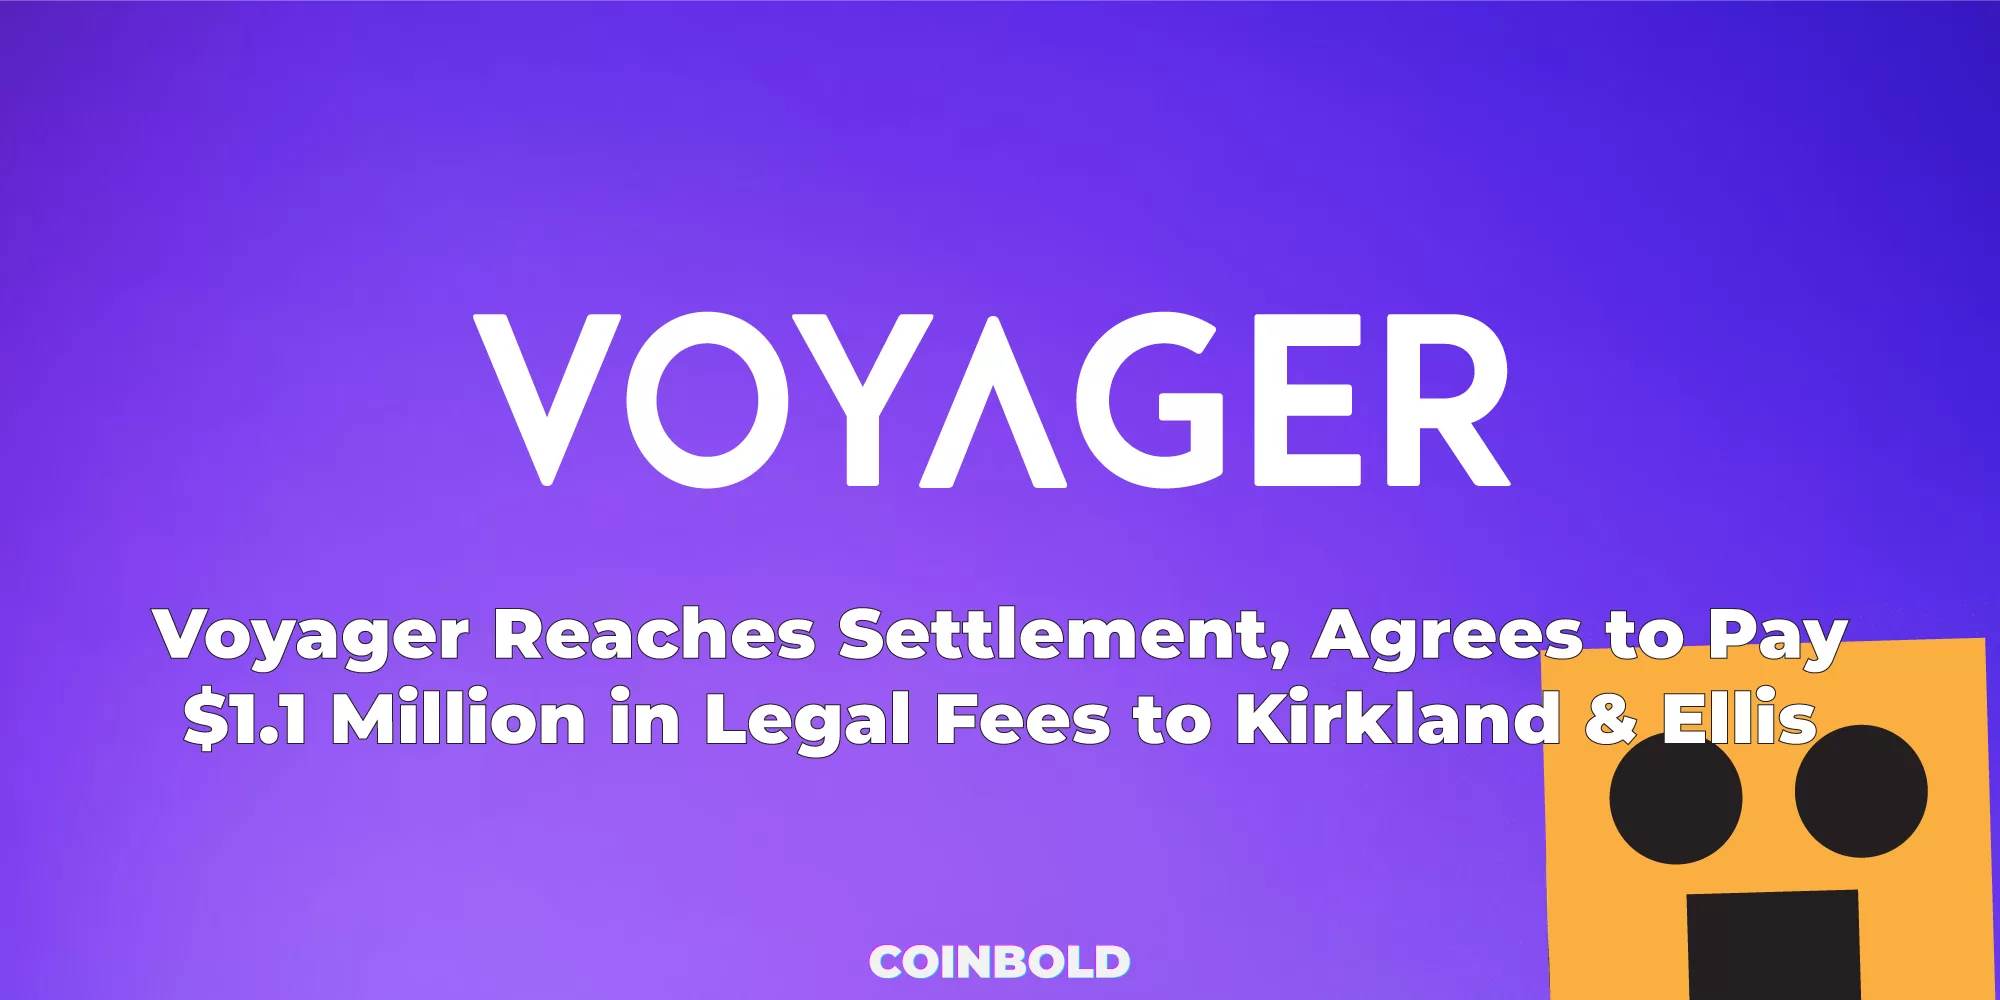 Voyager Reaches Settlement, Agrees to Pay $1.1 Million in Legal Fees to Kirkland & Ellis